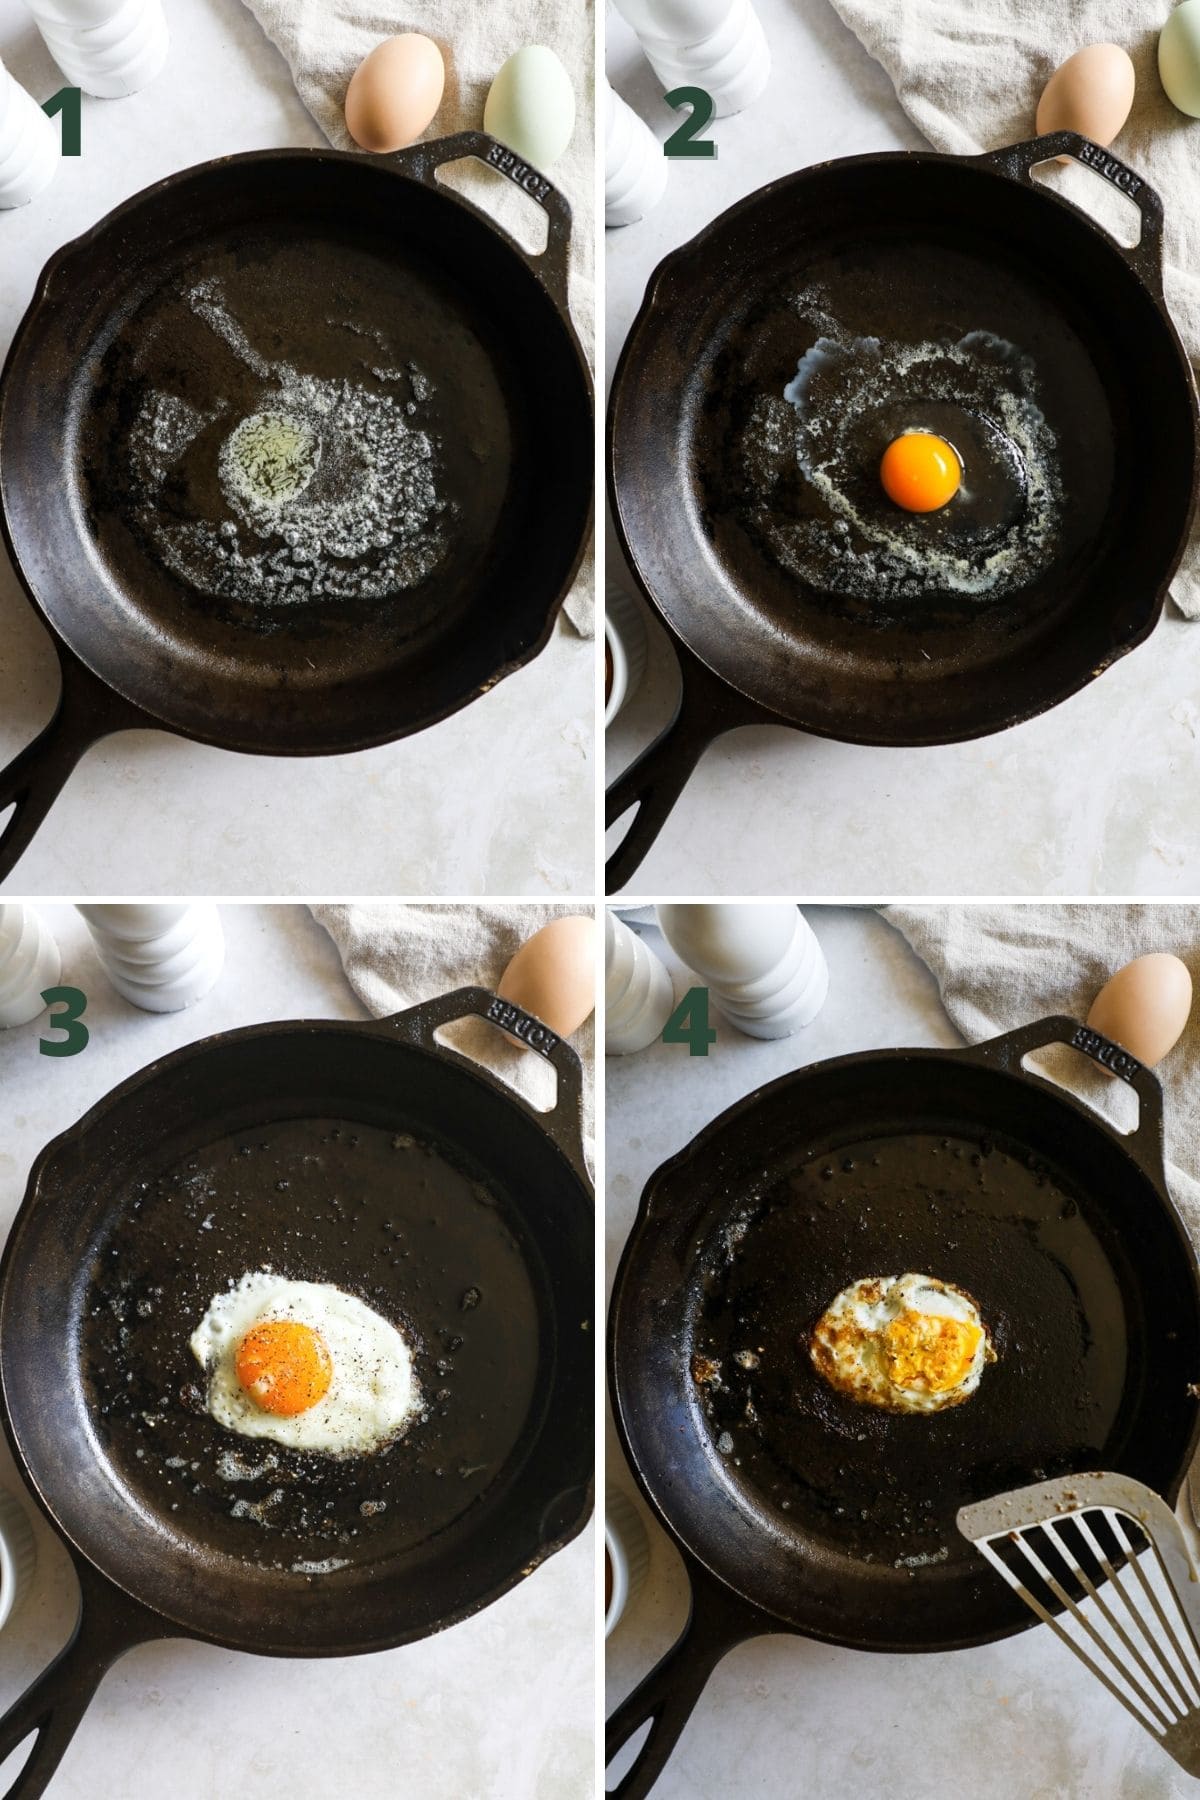 How to make over easy eggs in a cast iron skillet.